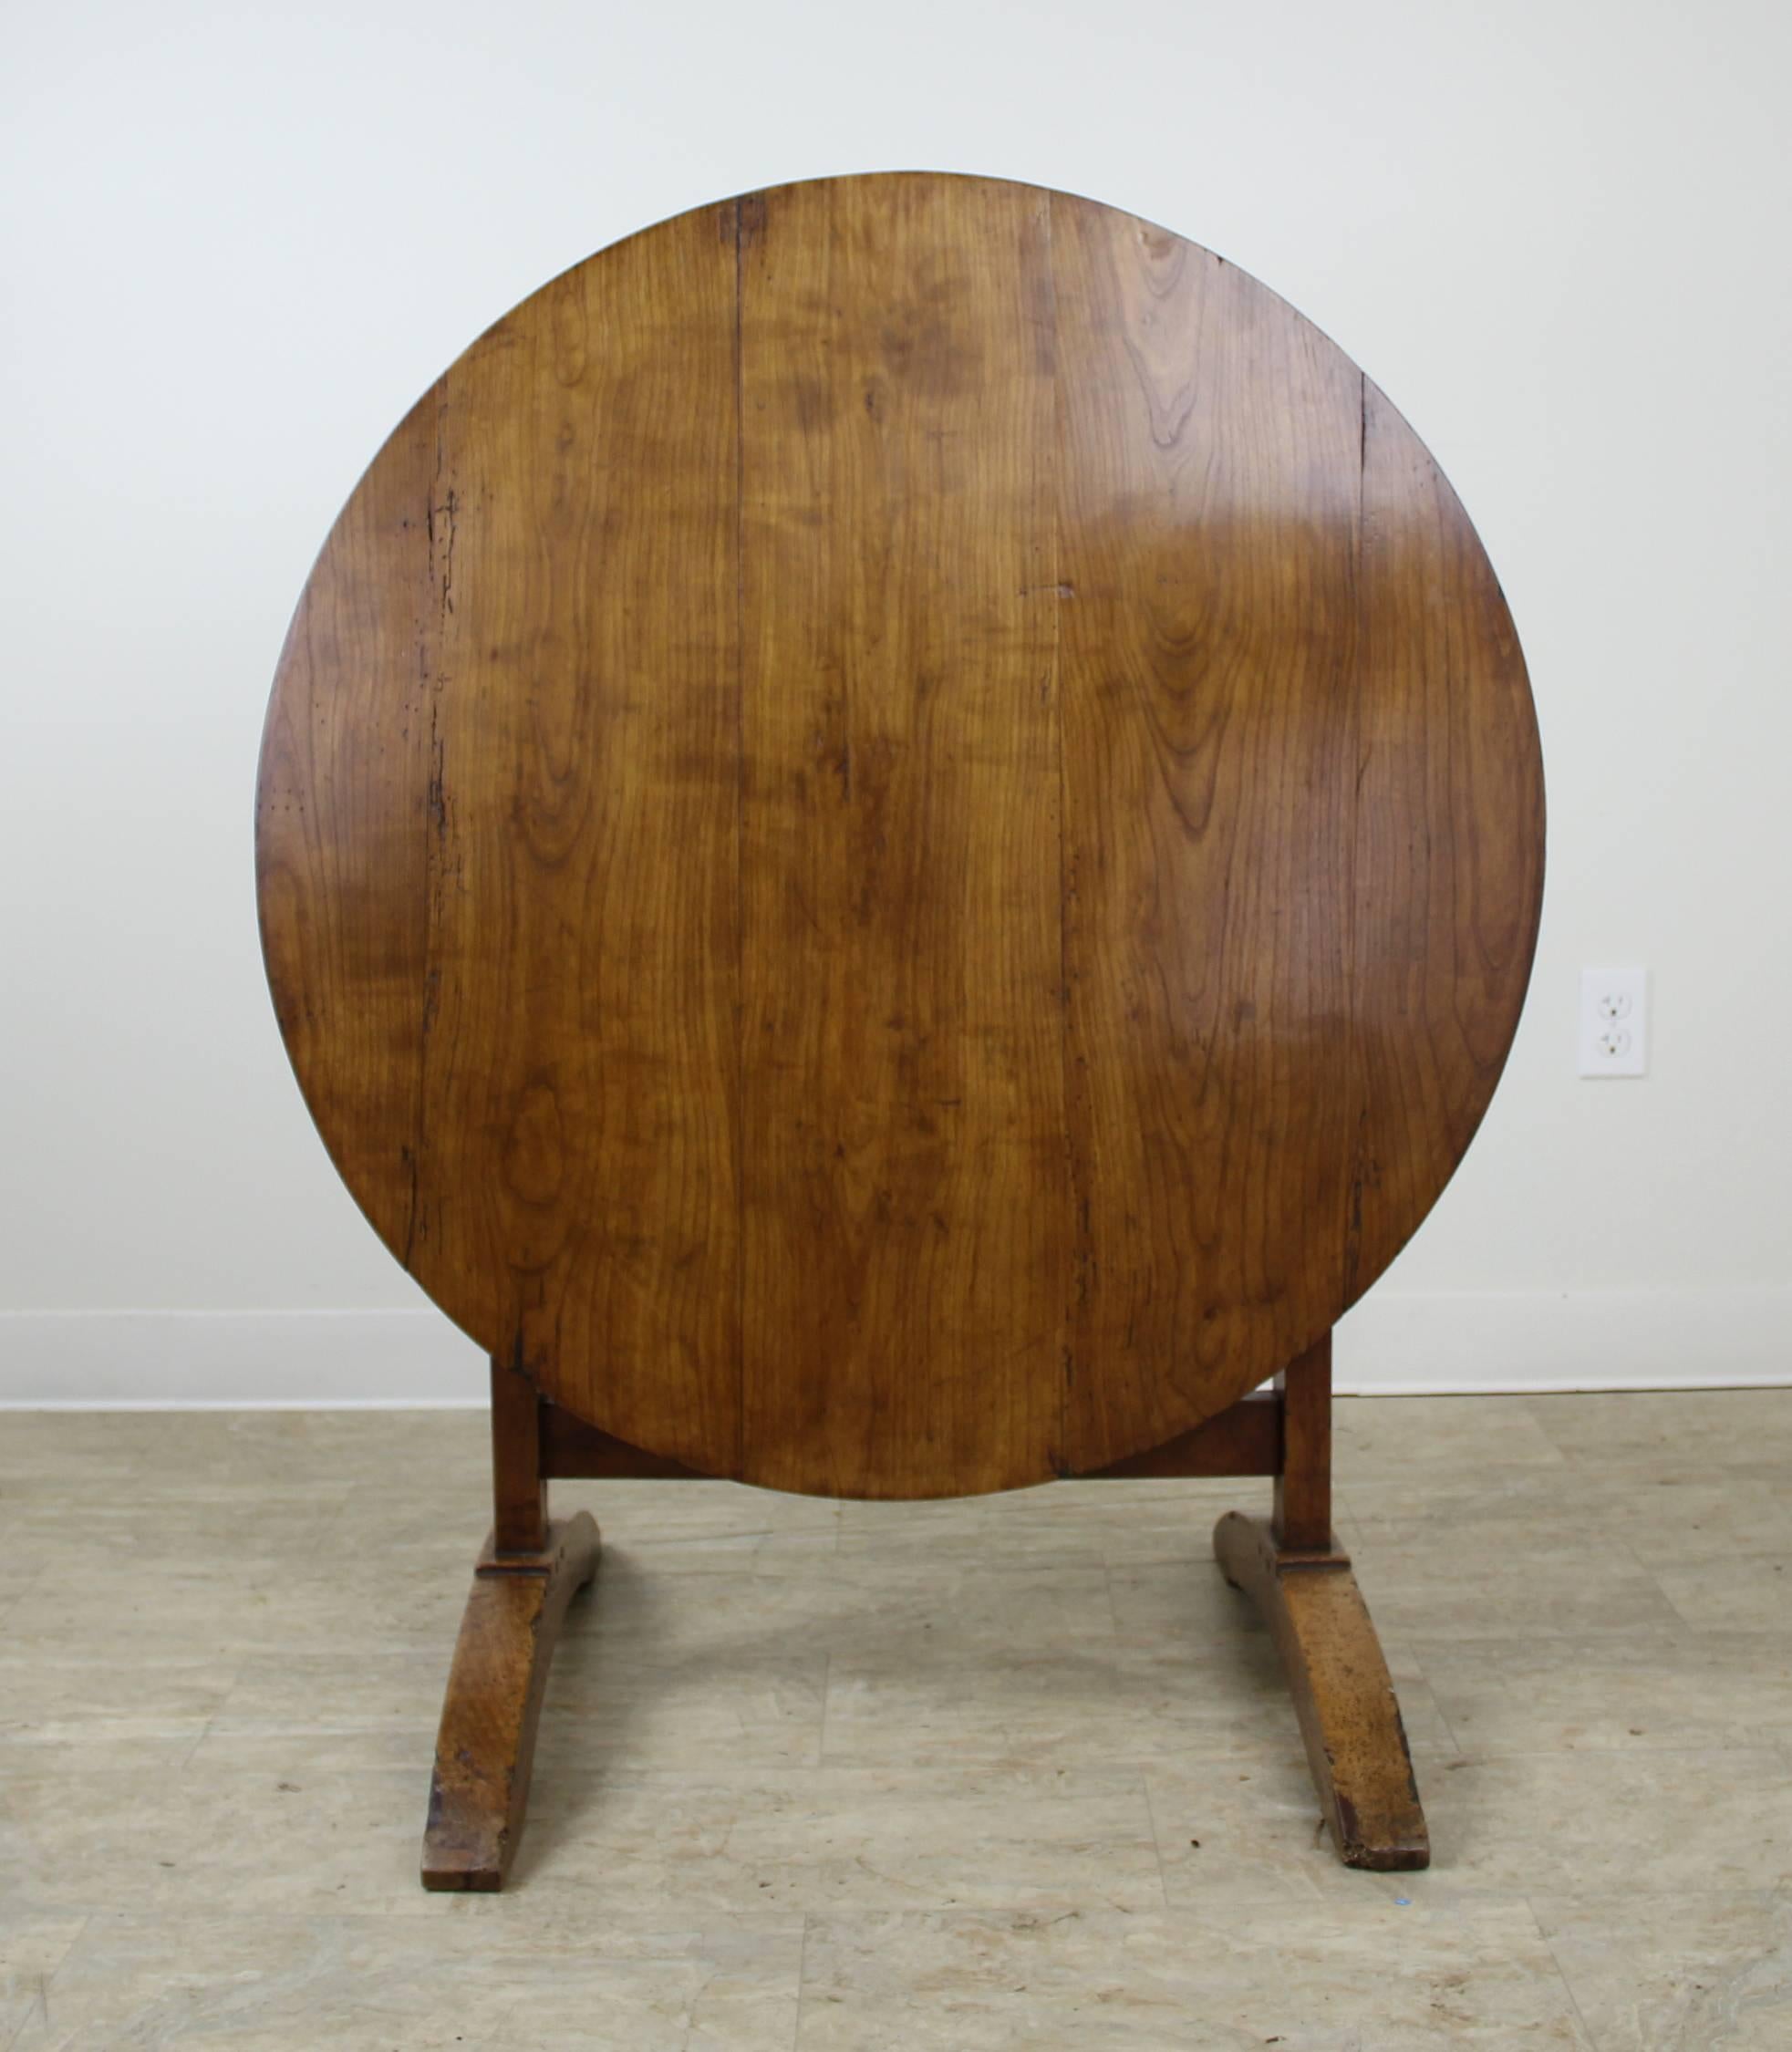 This cherry wine tasting table, also known as vendange table in the vineyards of France, is a charming example, and could be utilized as an end table or a smaller breakfast table. It would be a lovely centre hall table also. As is common, the top